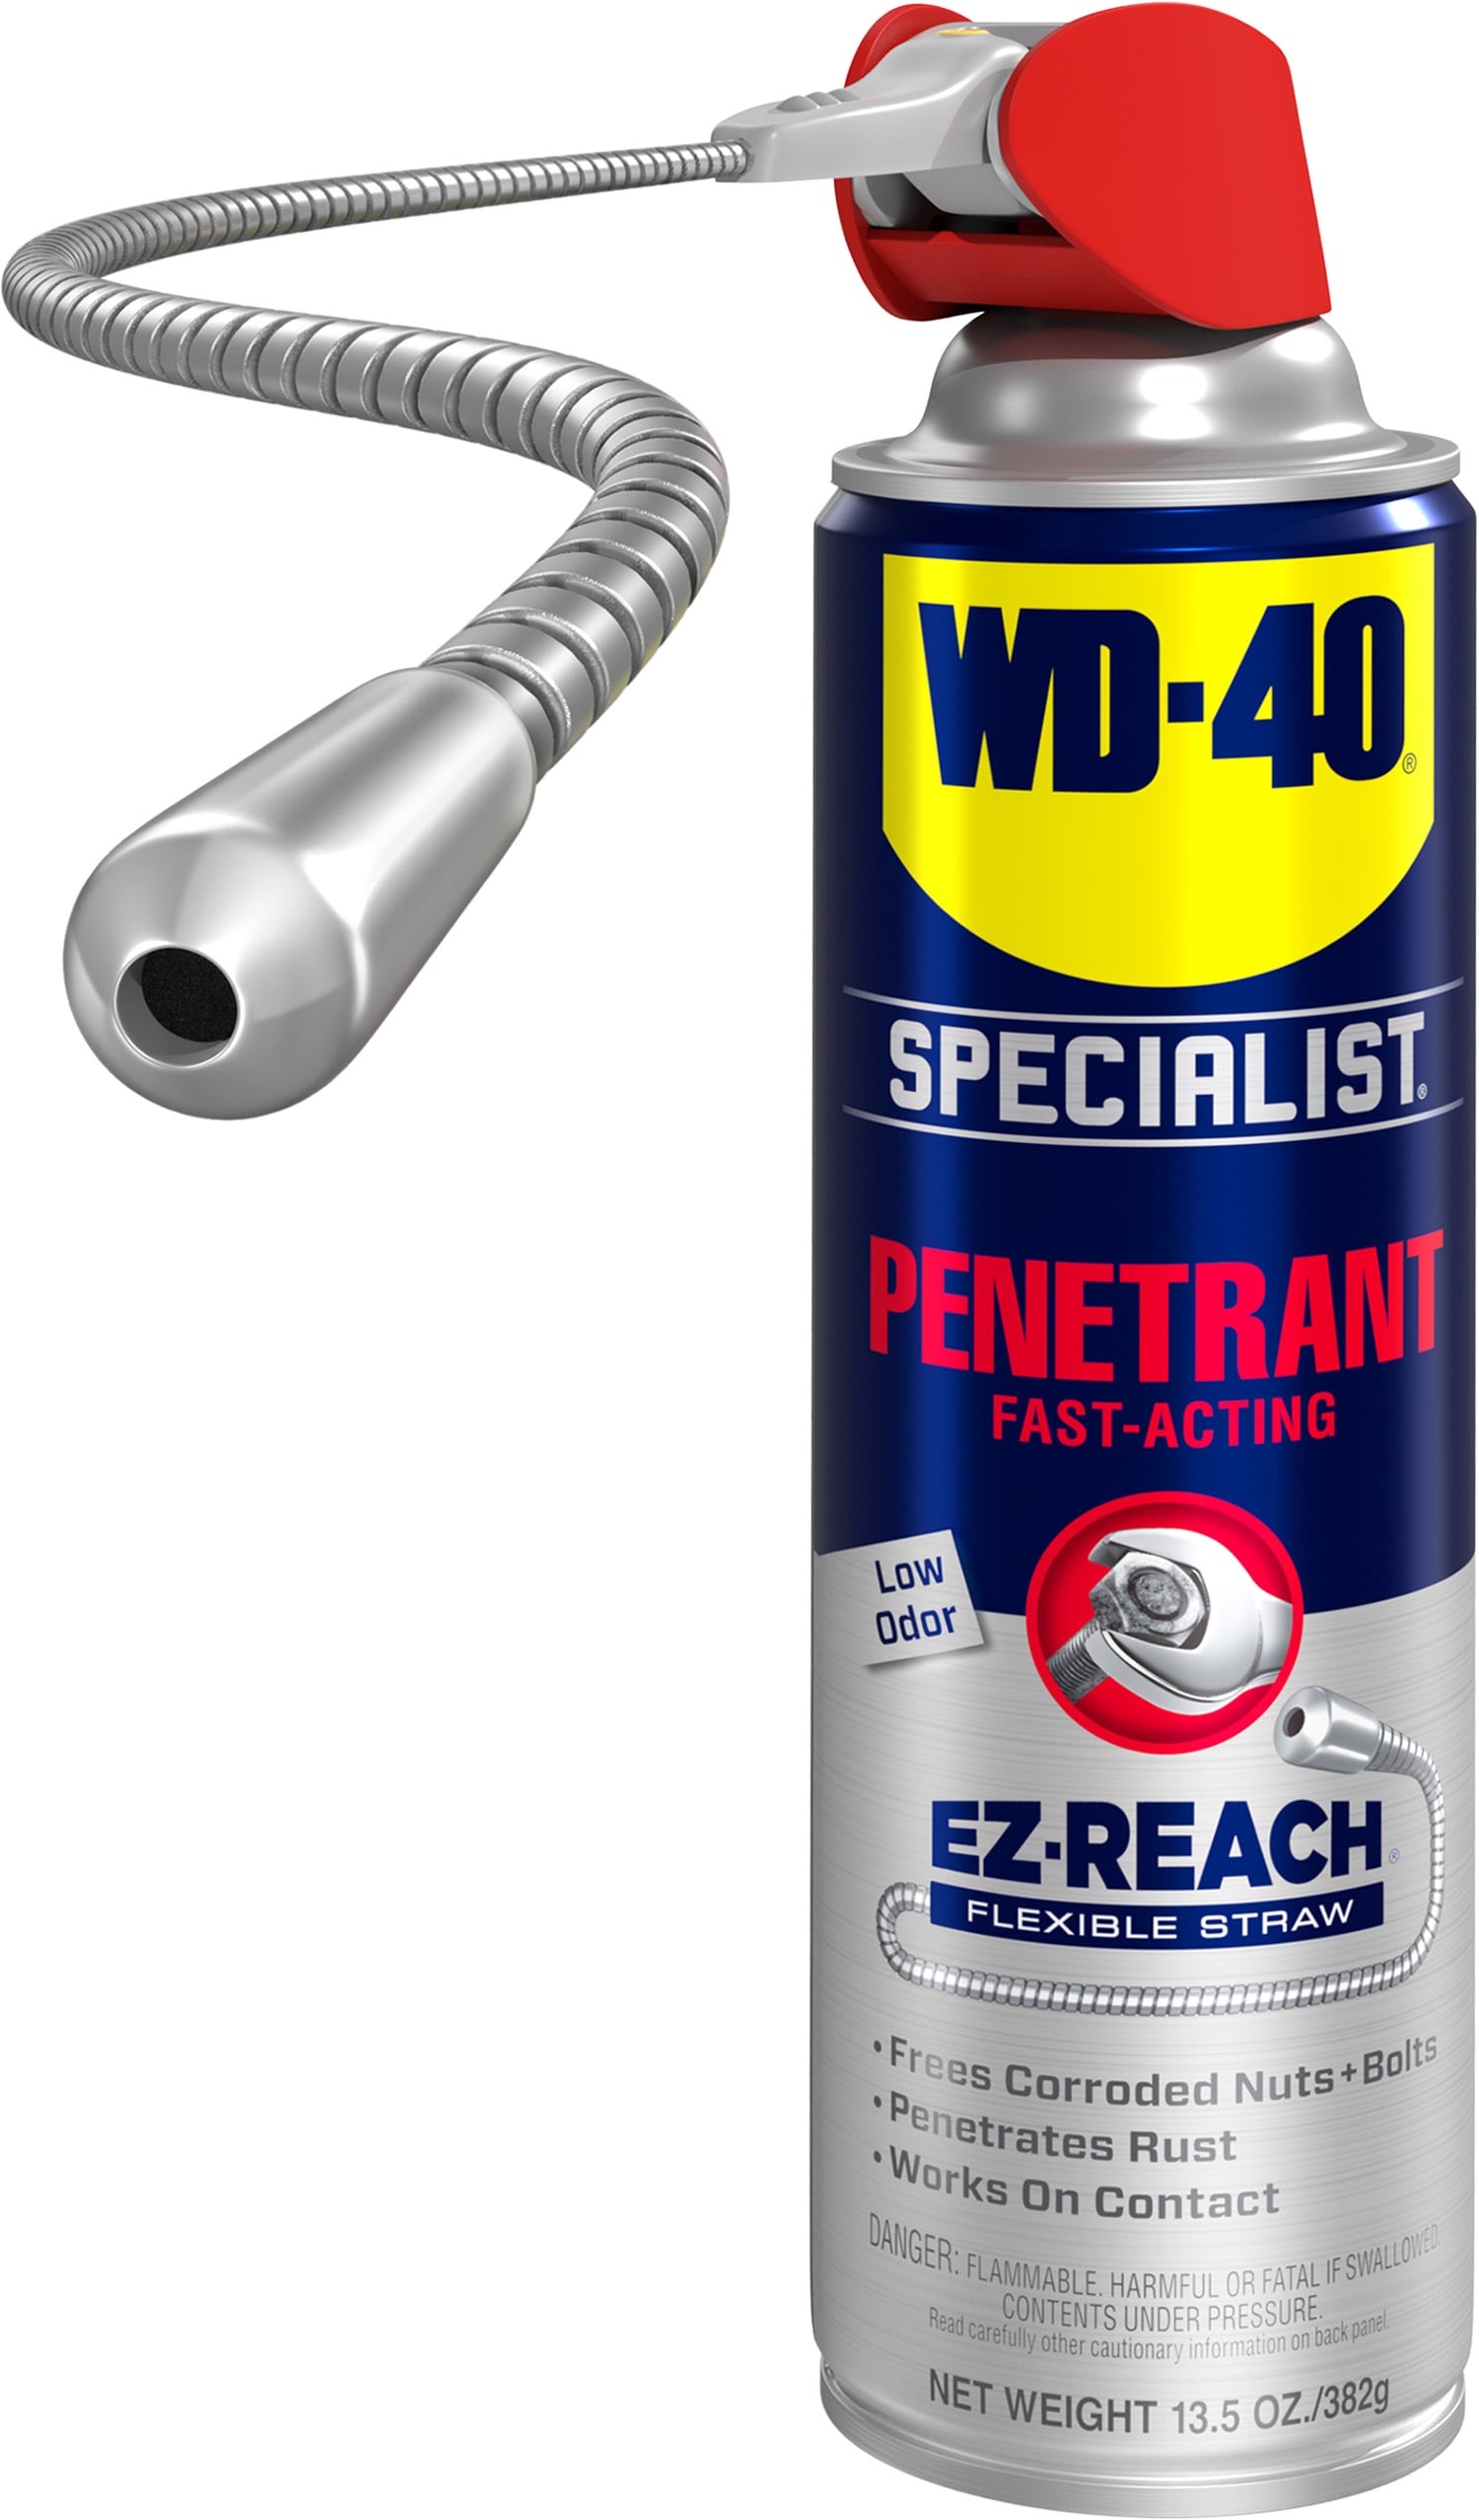 Electronic Cleaner - WD-40 Specialist Automotive Range 